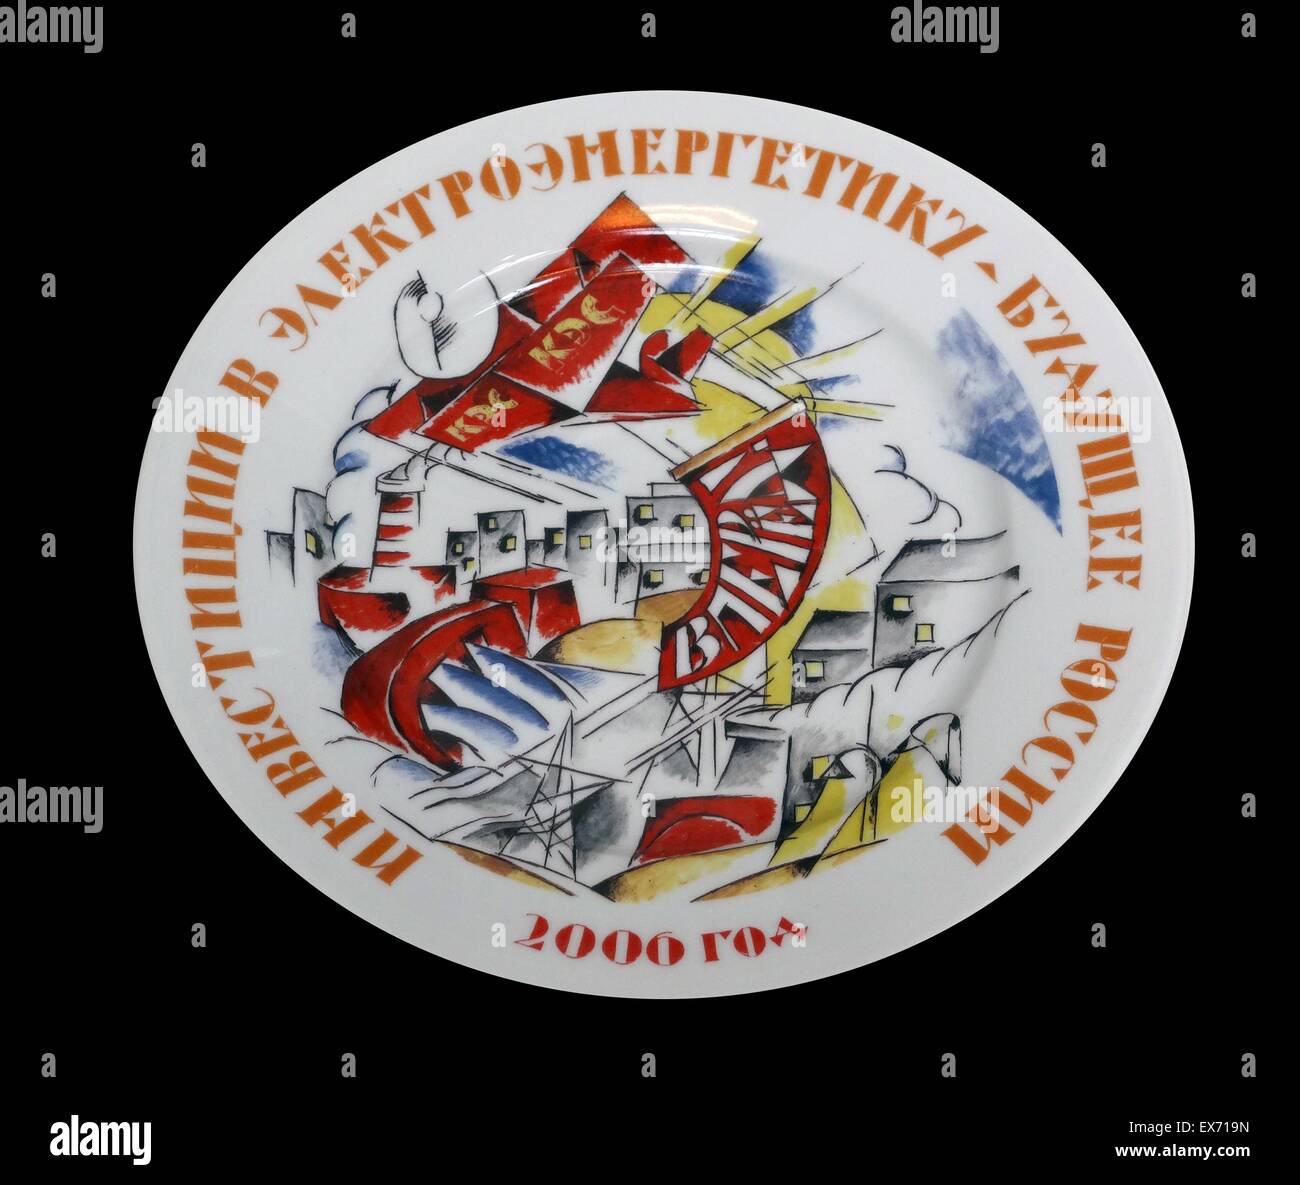 Investment in electrical energy is the future of Russia, 2006’ Porcelain plate, Russian, 2006. Stock Photo